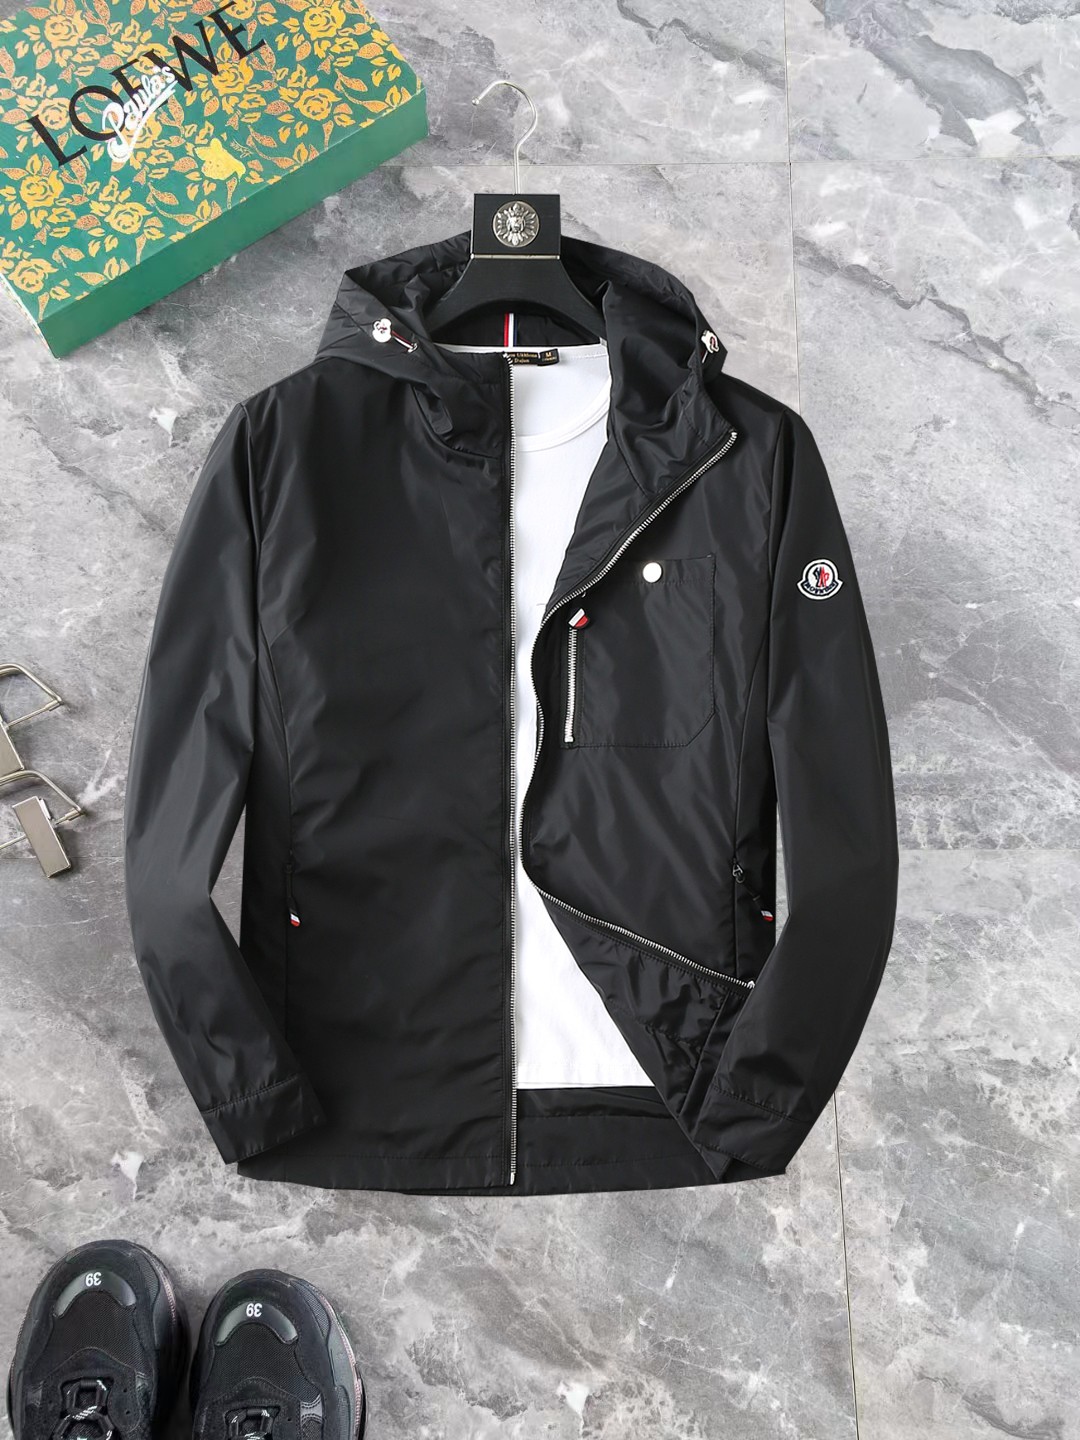 Moncler Clothing Coats & Jackets At Cheap Price
 Embroidery Fall Collection Fashion Hooded Top